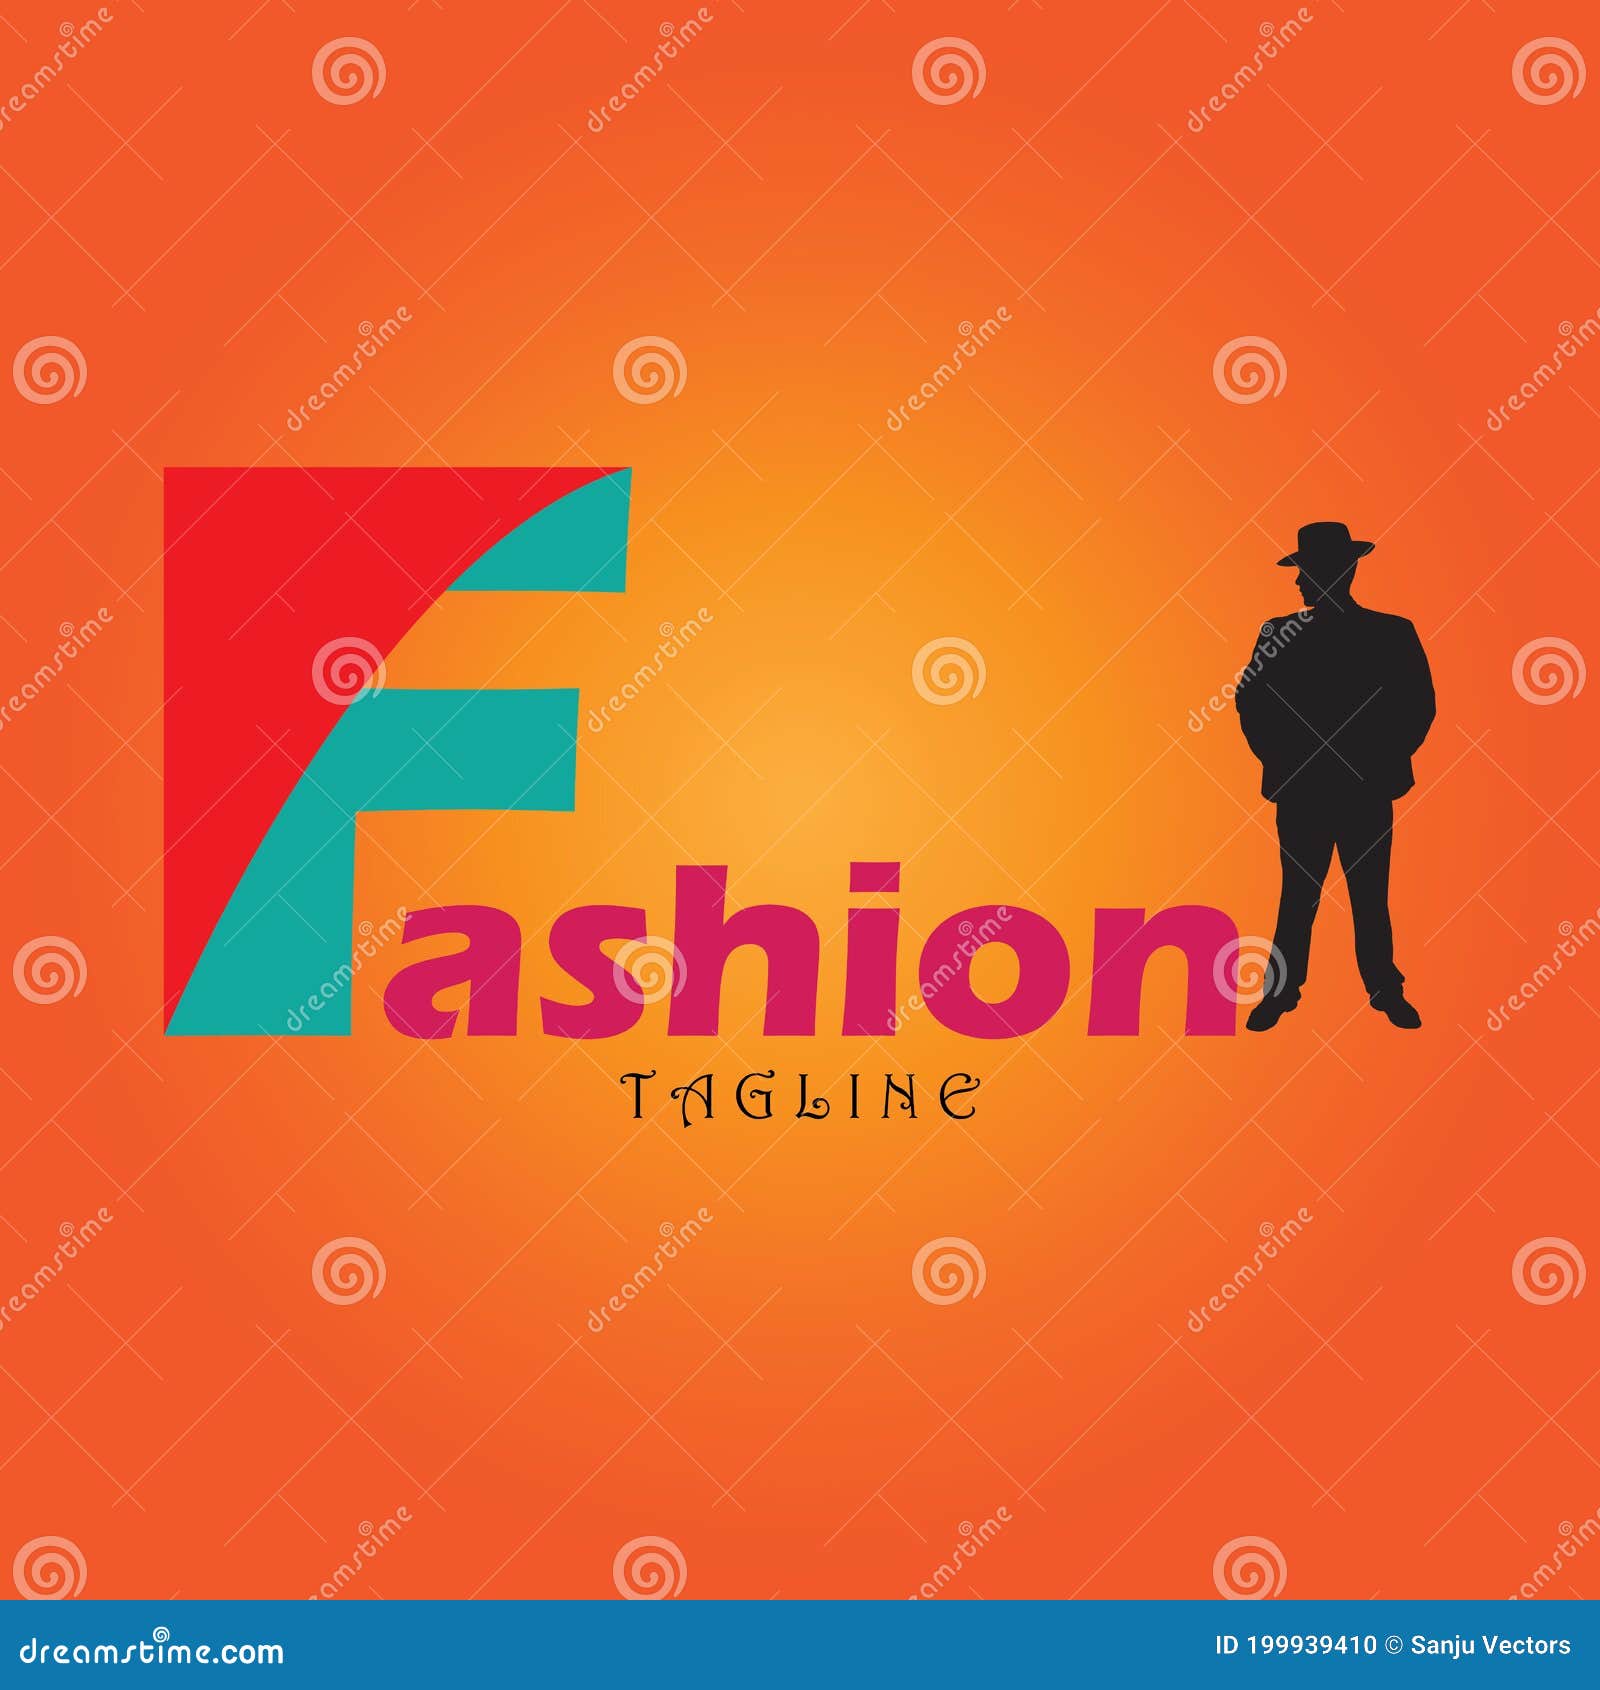 How To Get A New Logo Design For Your Fashion Business